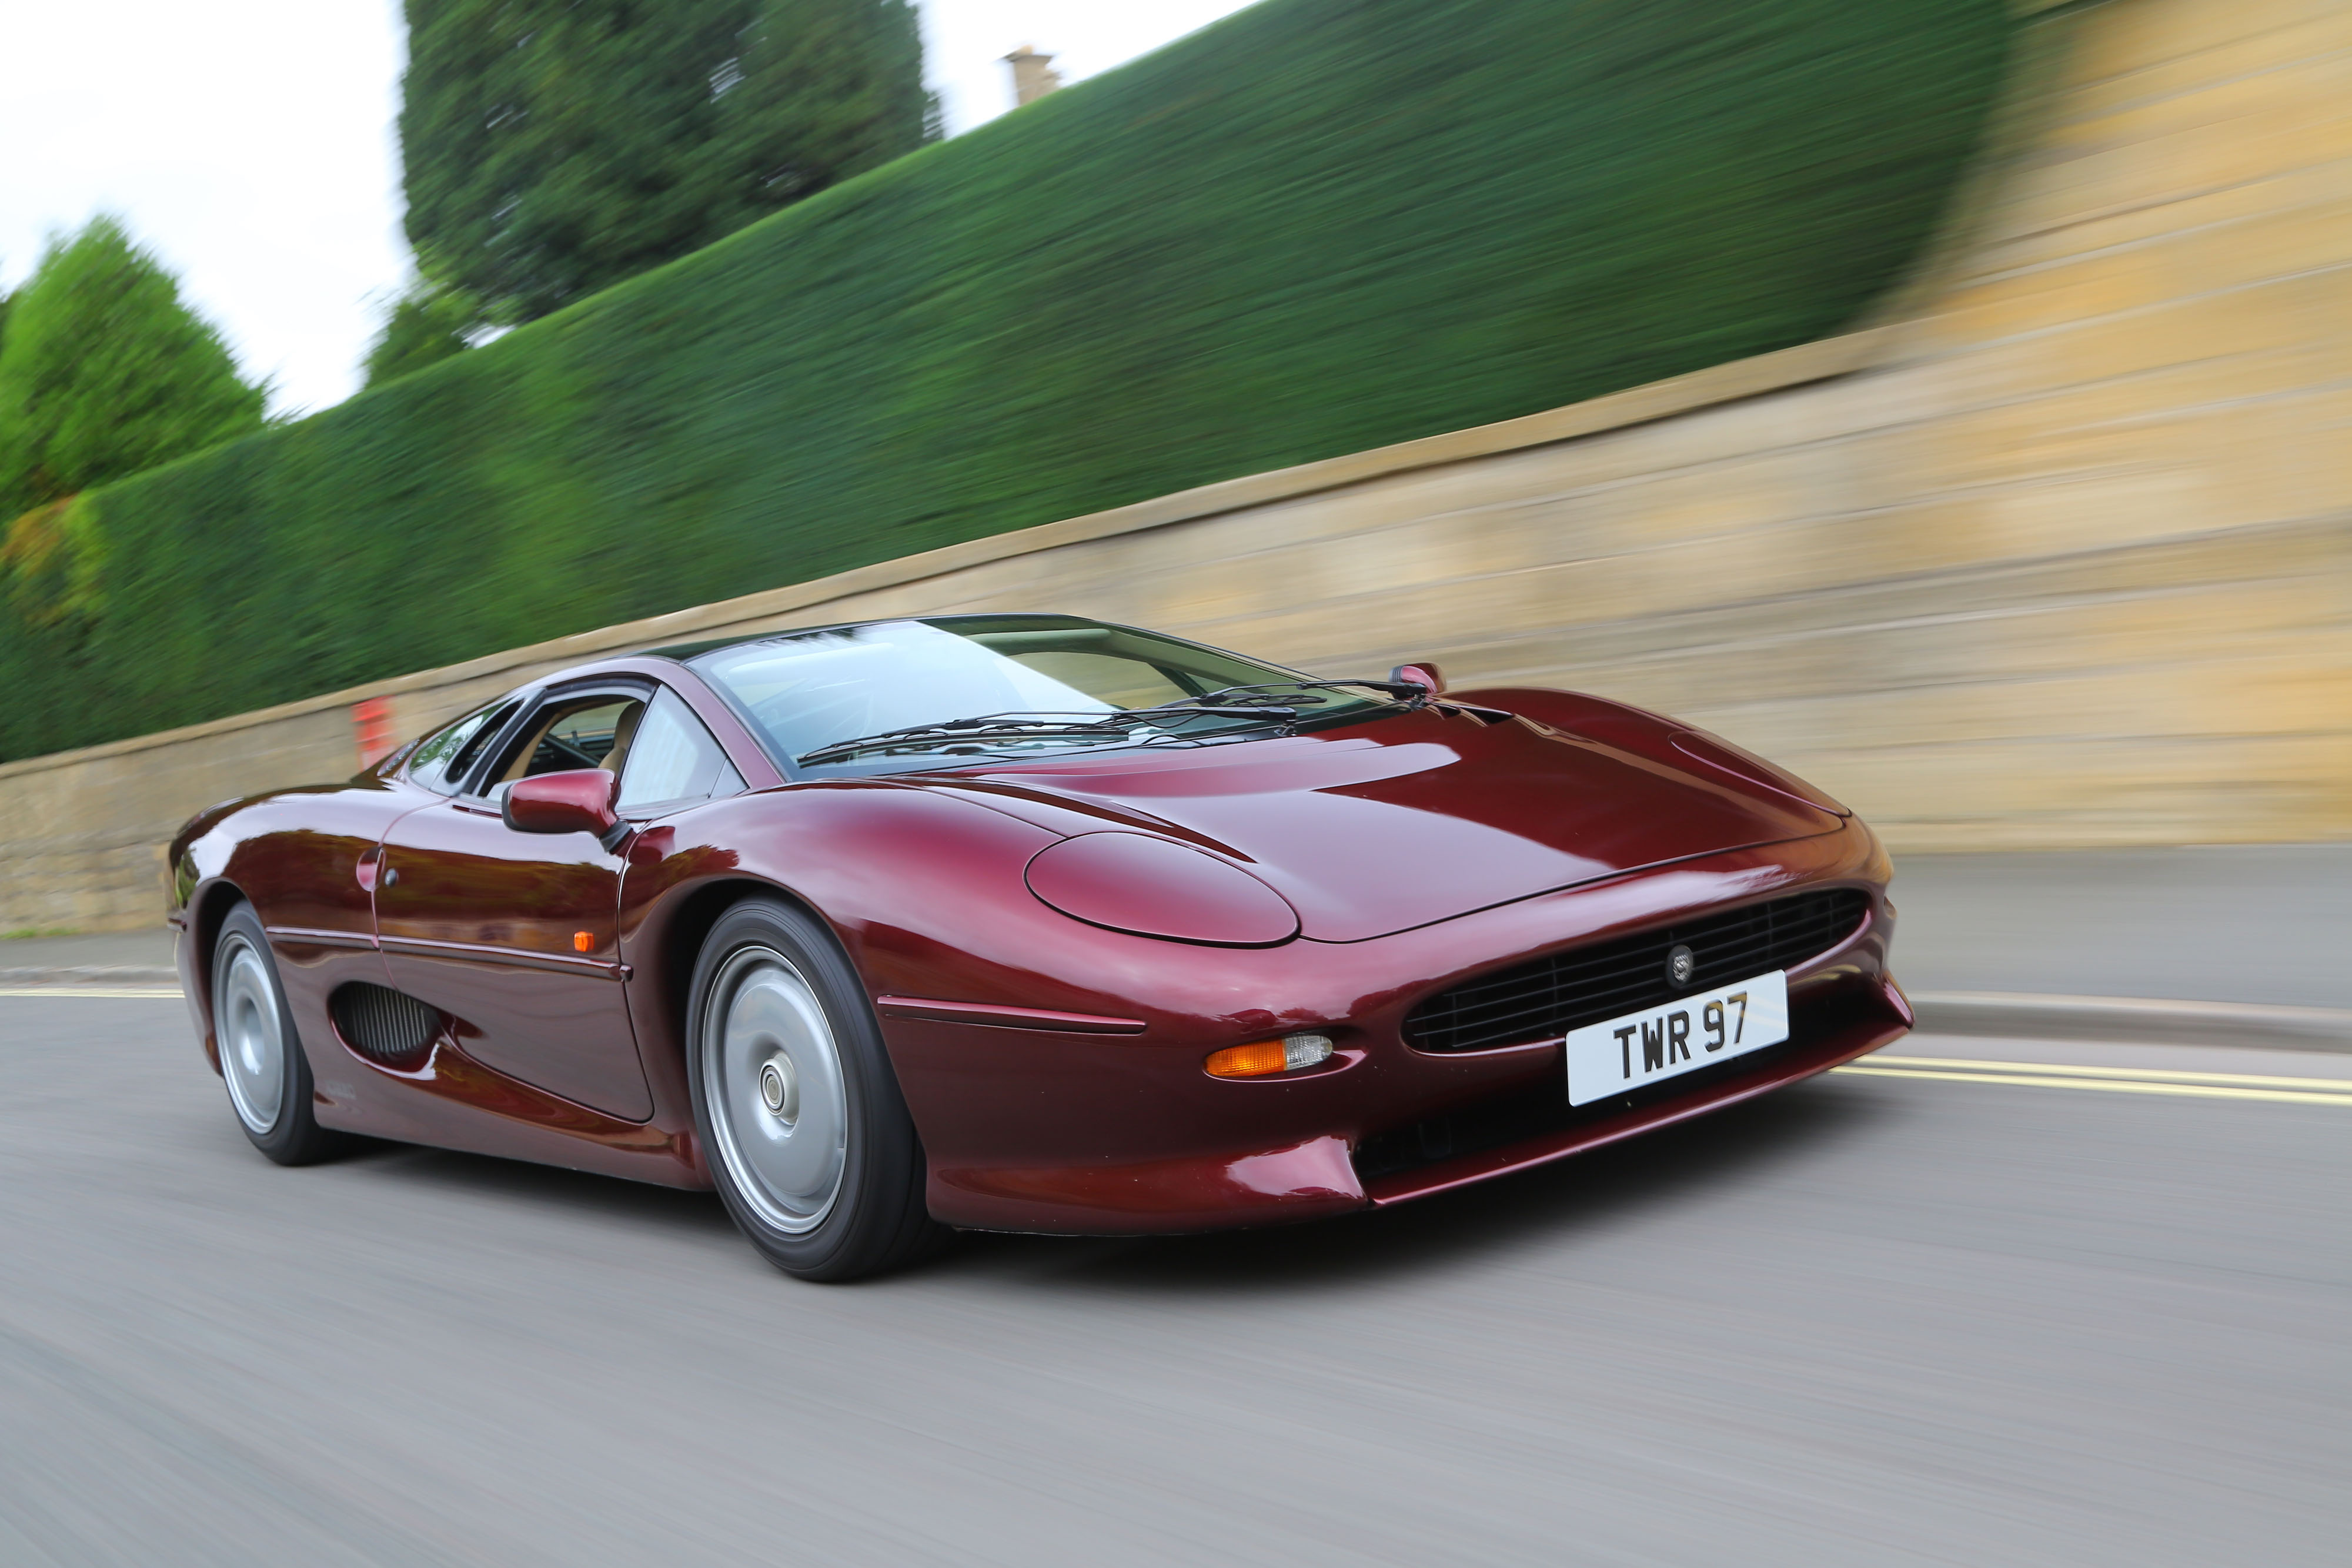 Part of the line-up of exclusive cars: 1992 Jaguar XJ220